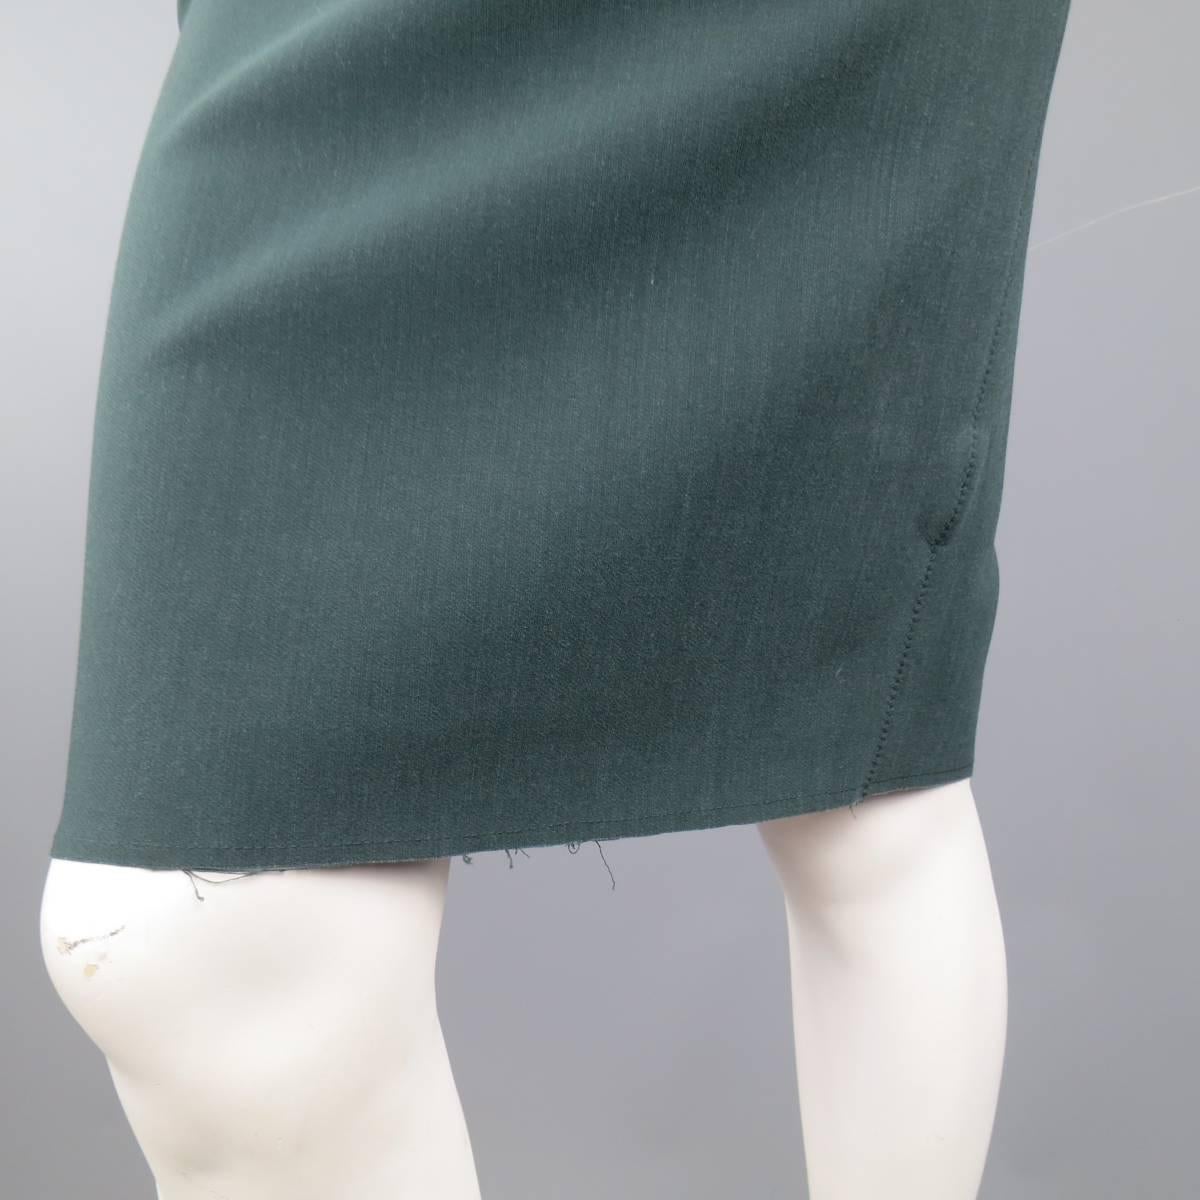 LANVIN polyamide stretch skirt in a deep emerald green features an exposed double zipper closure running up the back with satin piping.
 
Excellent Pre-Owned Condition
Marked: 36
 
Measurements:
 
Waste: 27 in.
Hips: 31 in.
Length: 23 in.